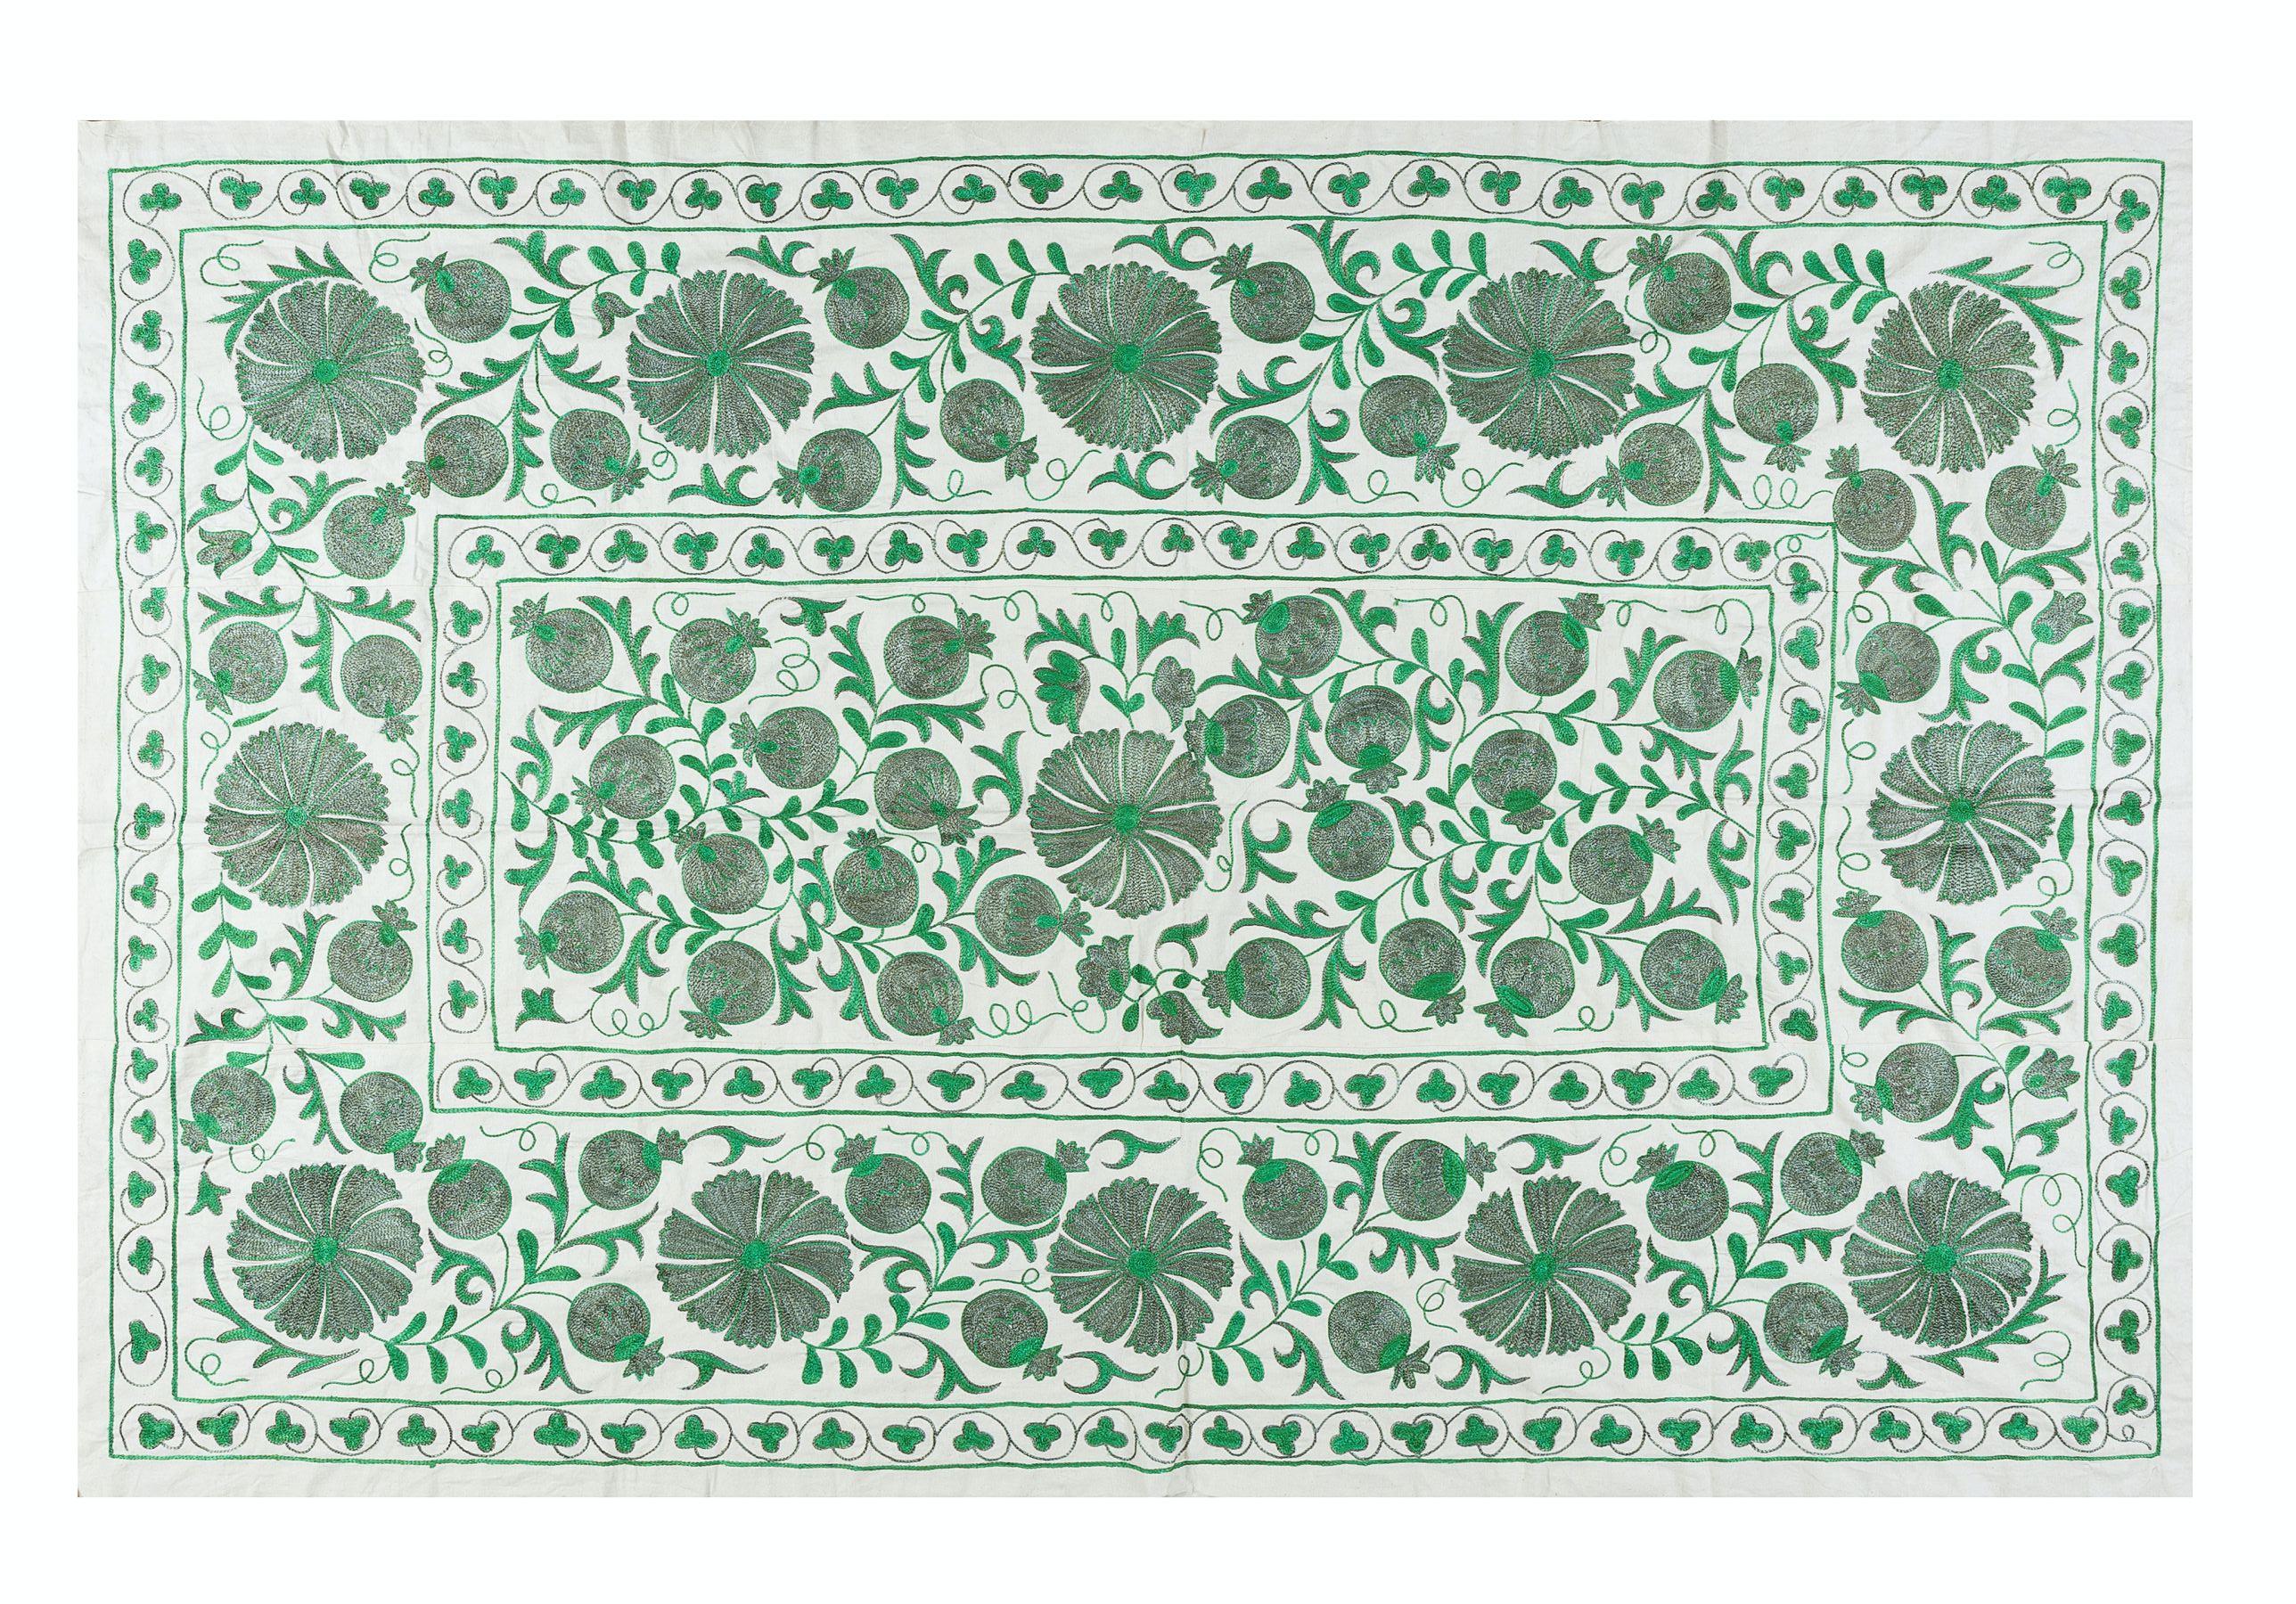 Cotton 4.6x6.8 Ft Silk Hand Embroidered Uzbek Suzani Wall Hanging in Green and Cream For Sale